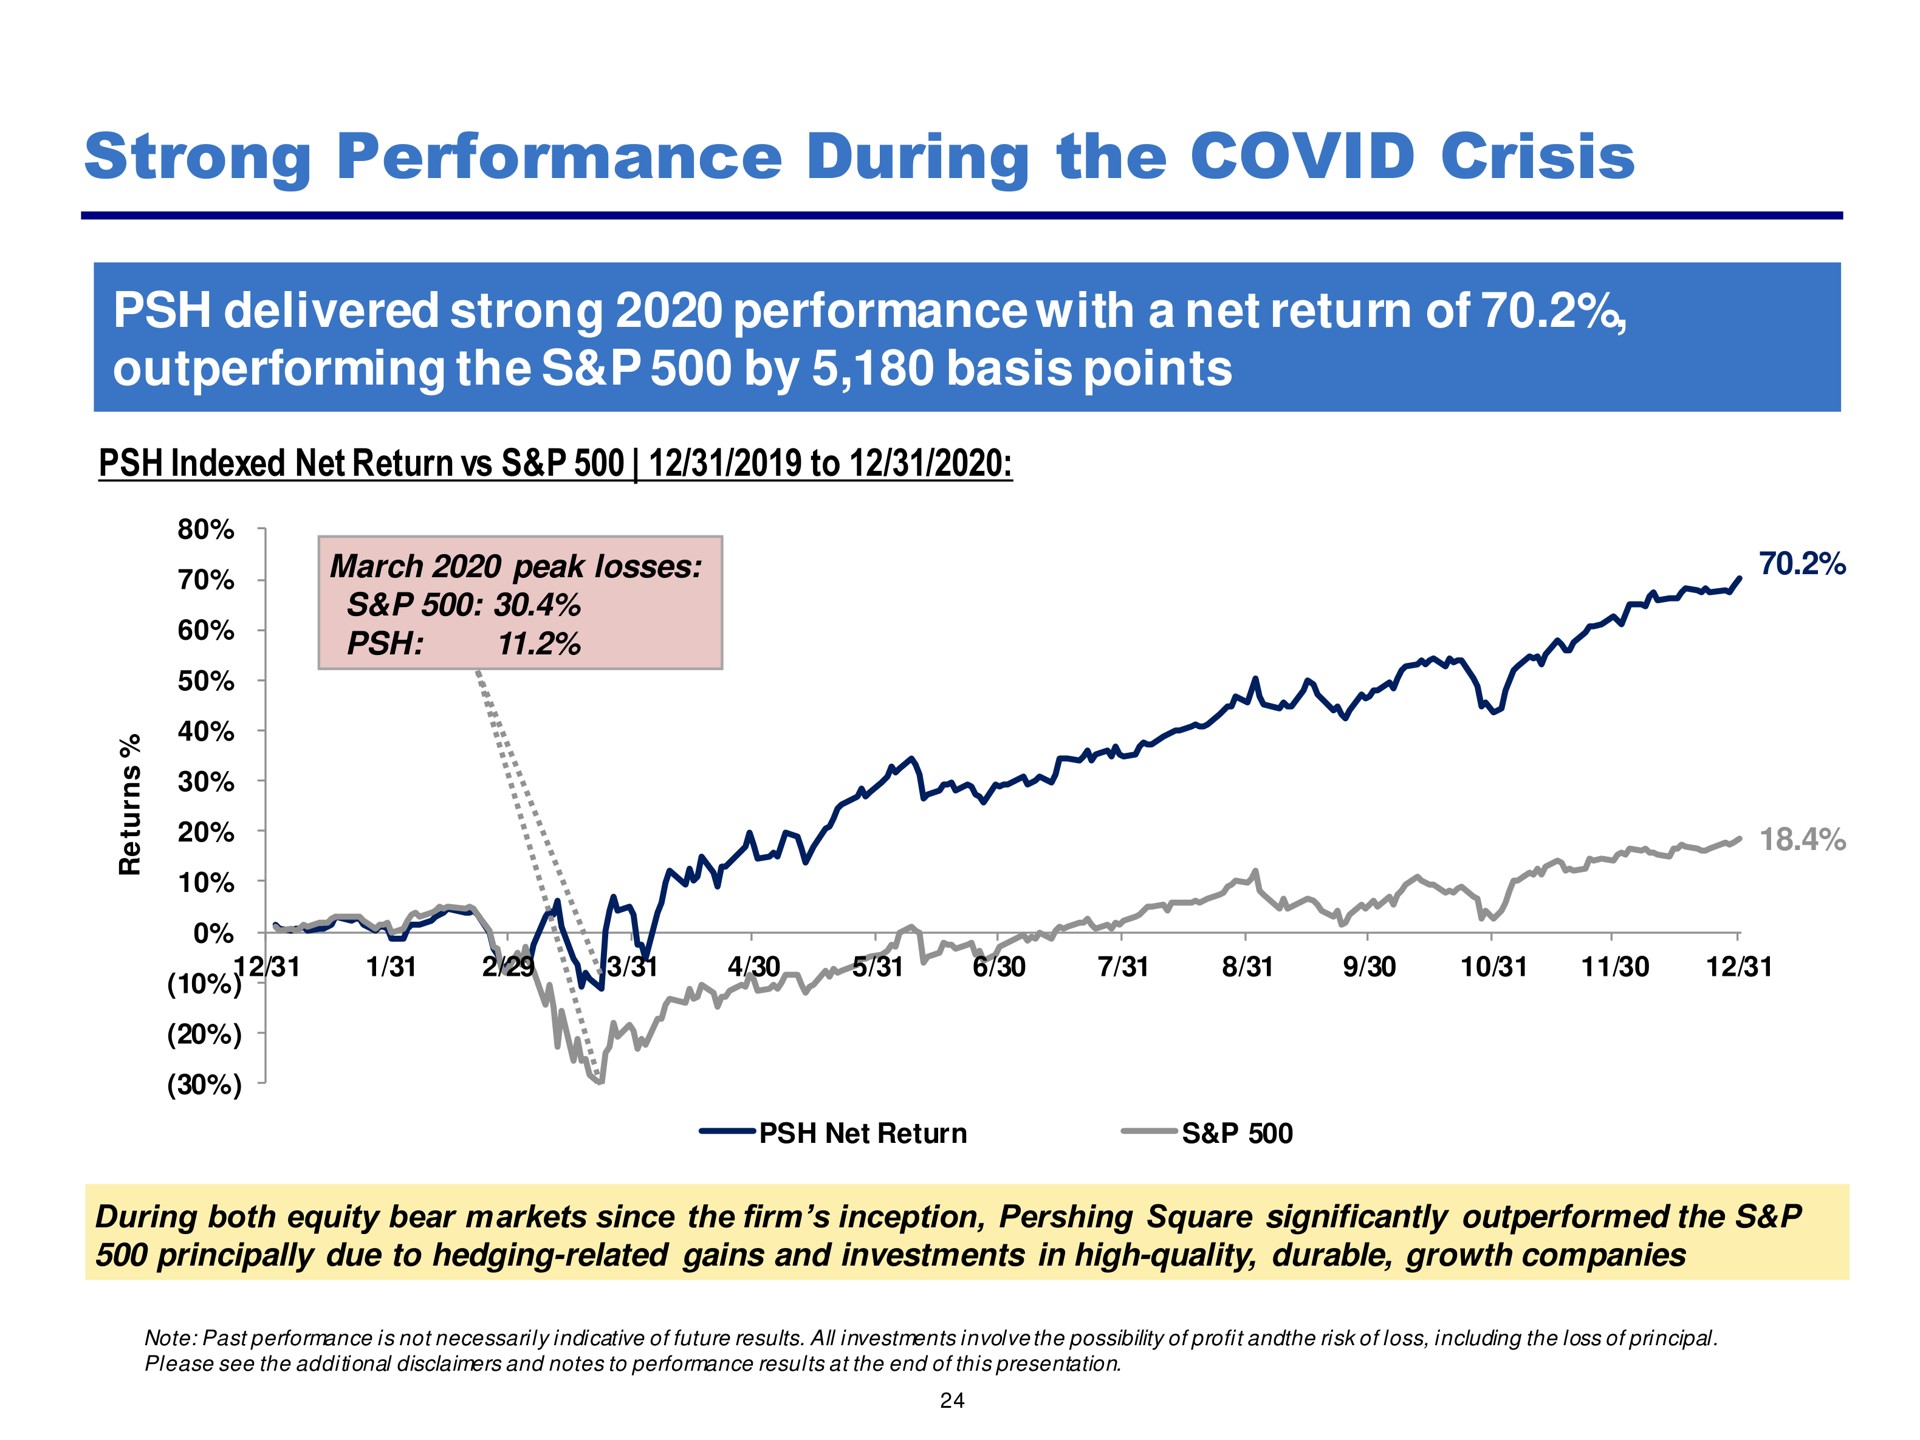 strong performance during the covid crisis outperforming by basis points | Pershing Square